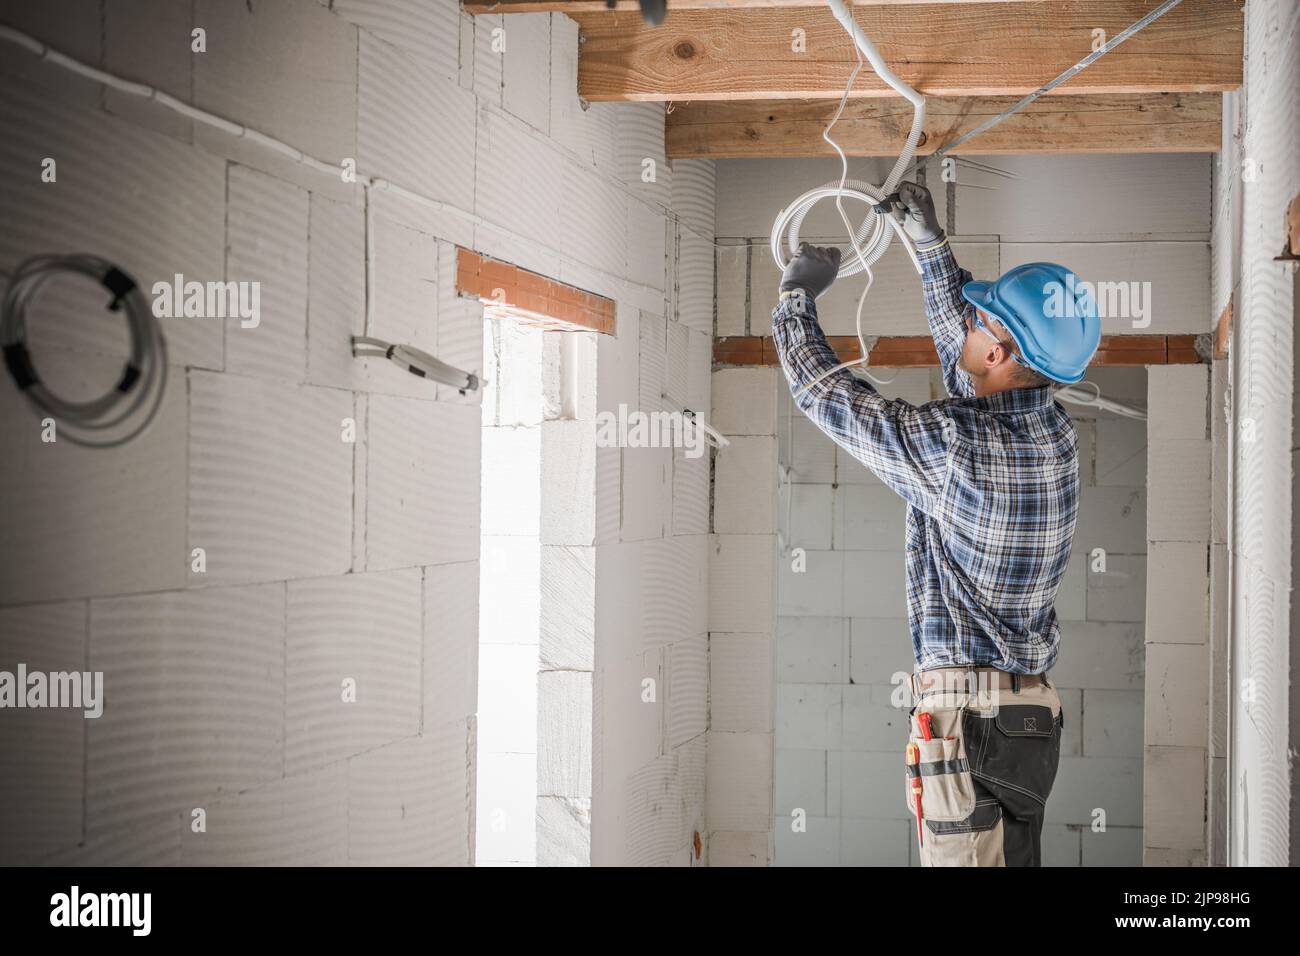 Caucasian Electrician Installing Power Line in Newly Built Residential Unit Pulling Cables Under the Ceiling. Construction Site in the Background. Ind Stock Photo